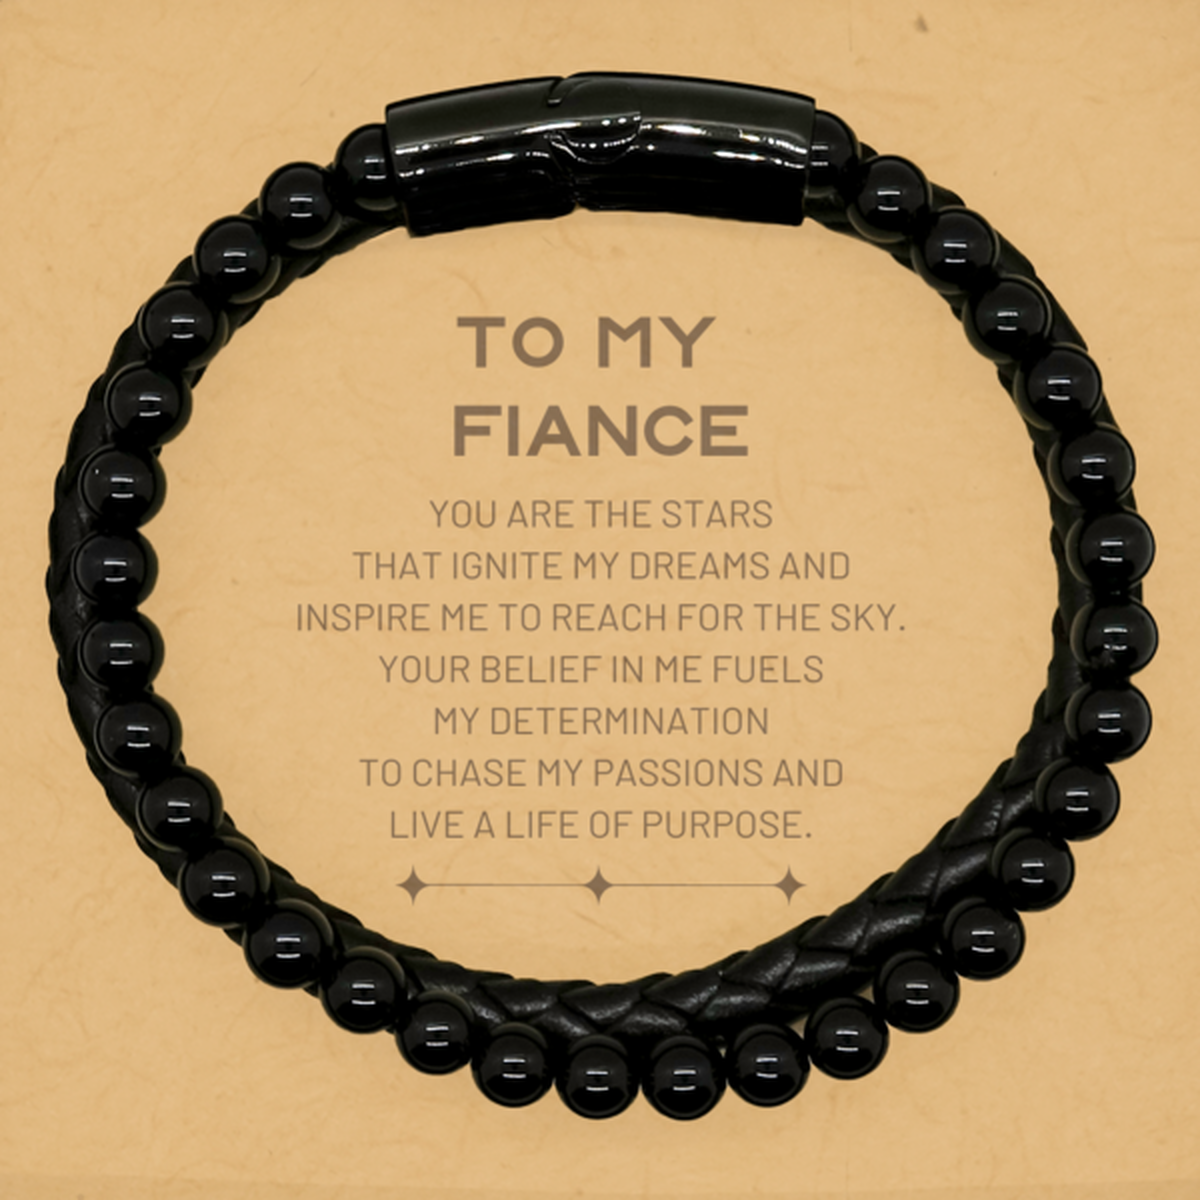 To My Fiance Stone Leather Bracelets, You are the stars that ignite my dreams and inspire me to reach for the sky, Birthday Unique Gifts For Fiance, Thank You Gifts For Fiance